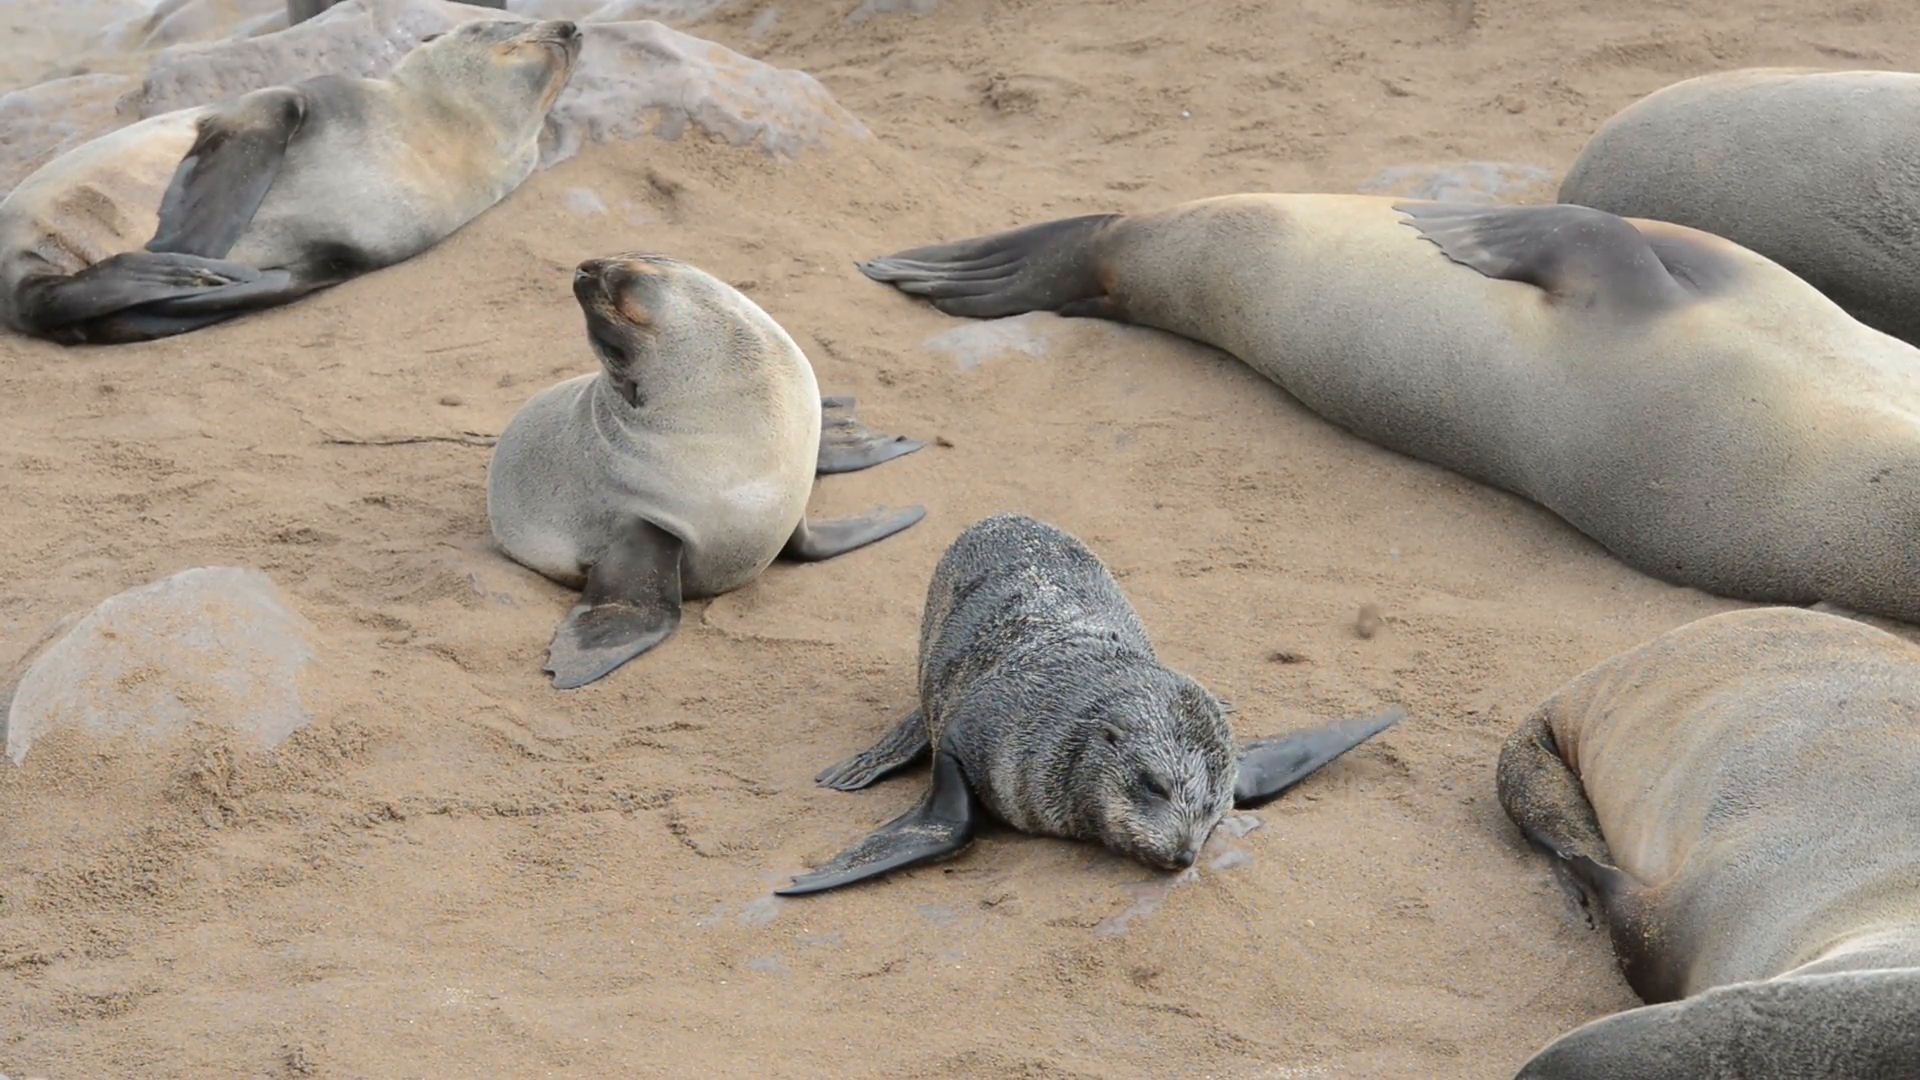 The group of fur seals is relaxing on a sand beach while small seal ...